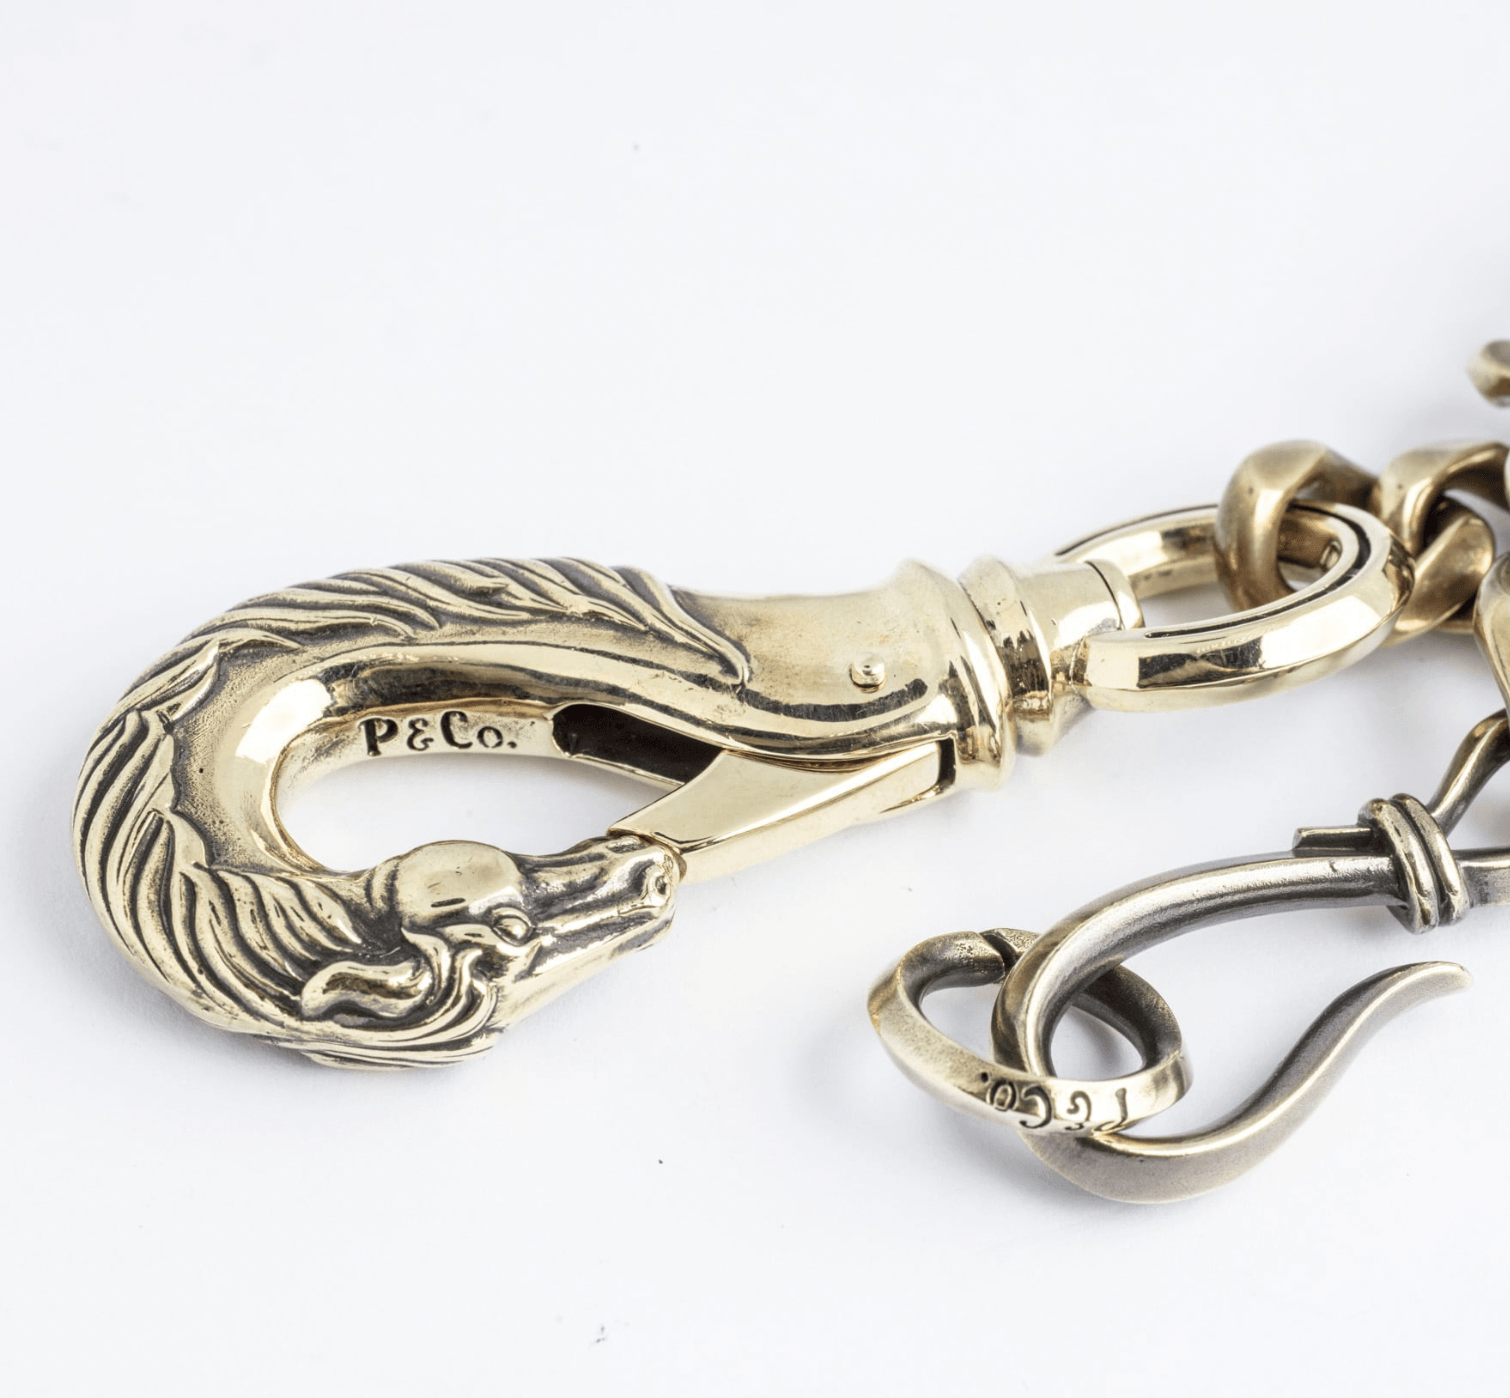 Peanuts & Co Horse Wallet Chain (horse×hook) - Brass